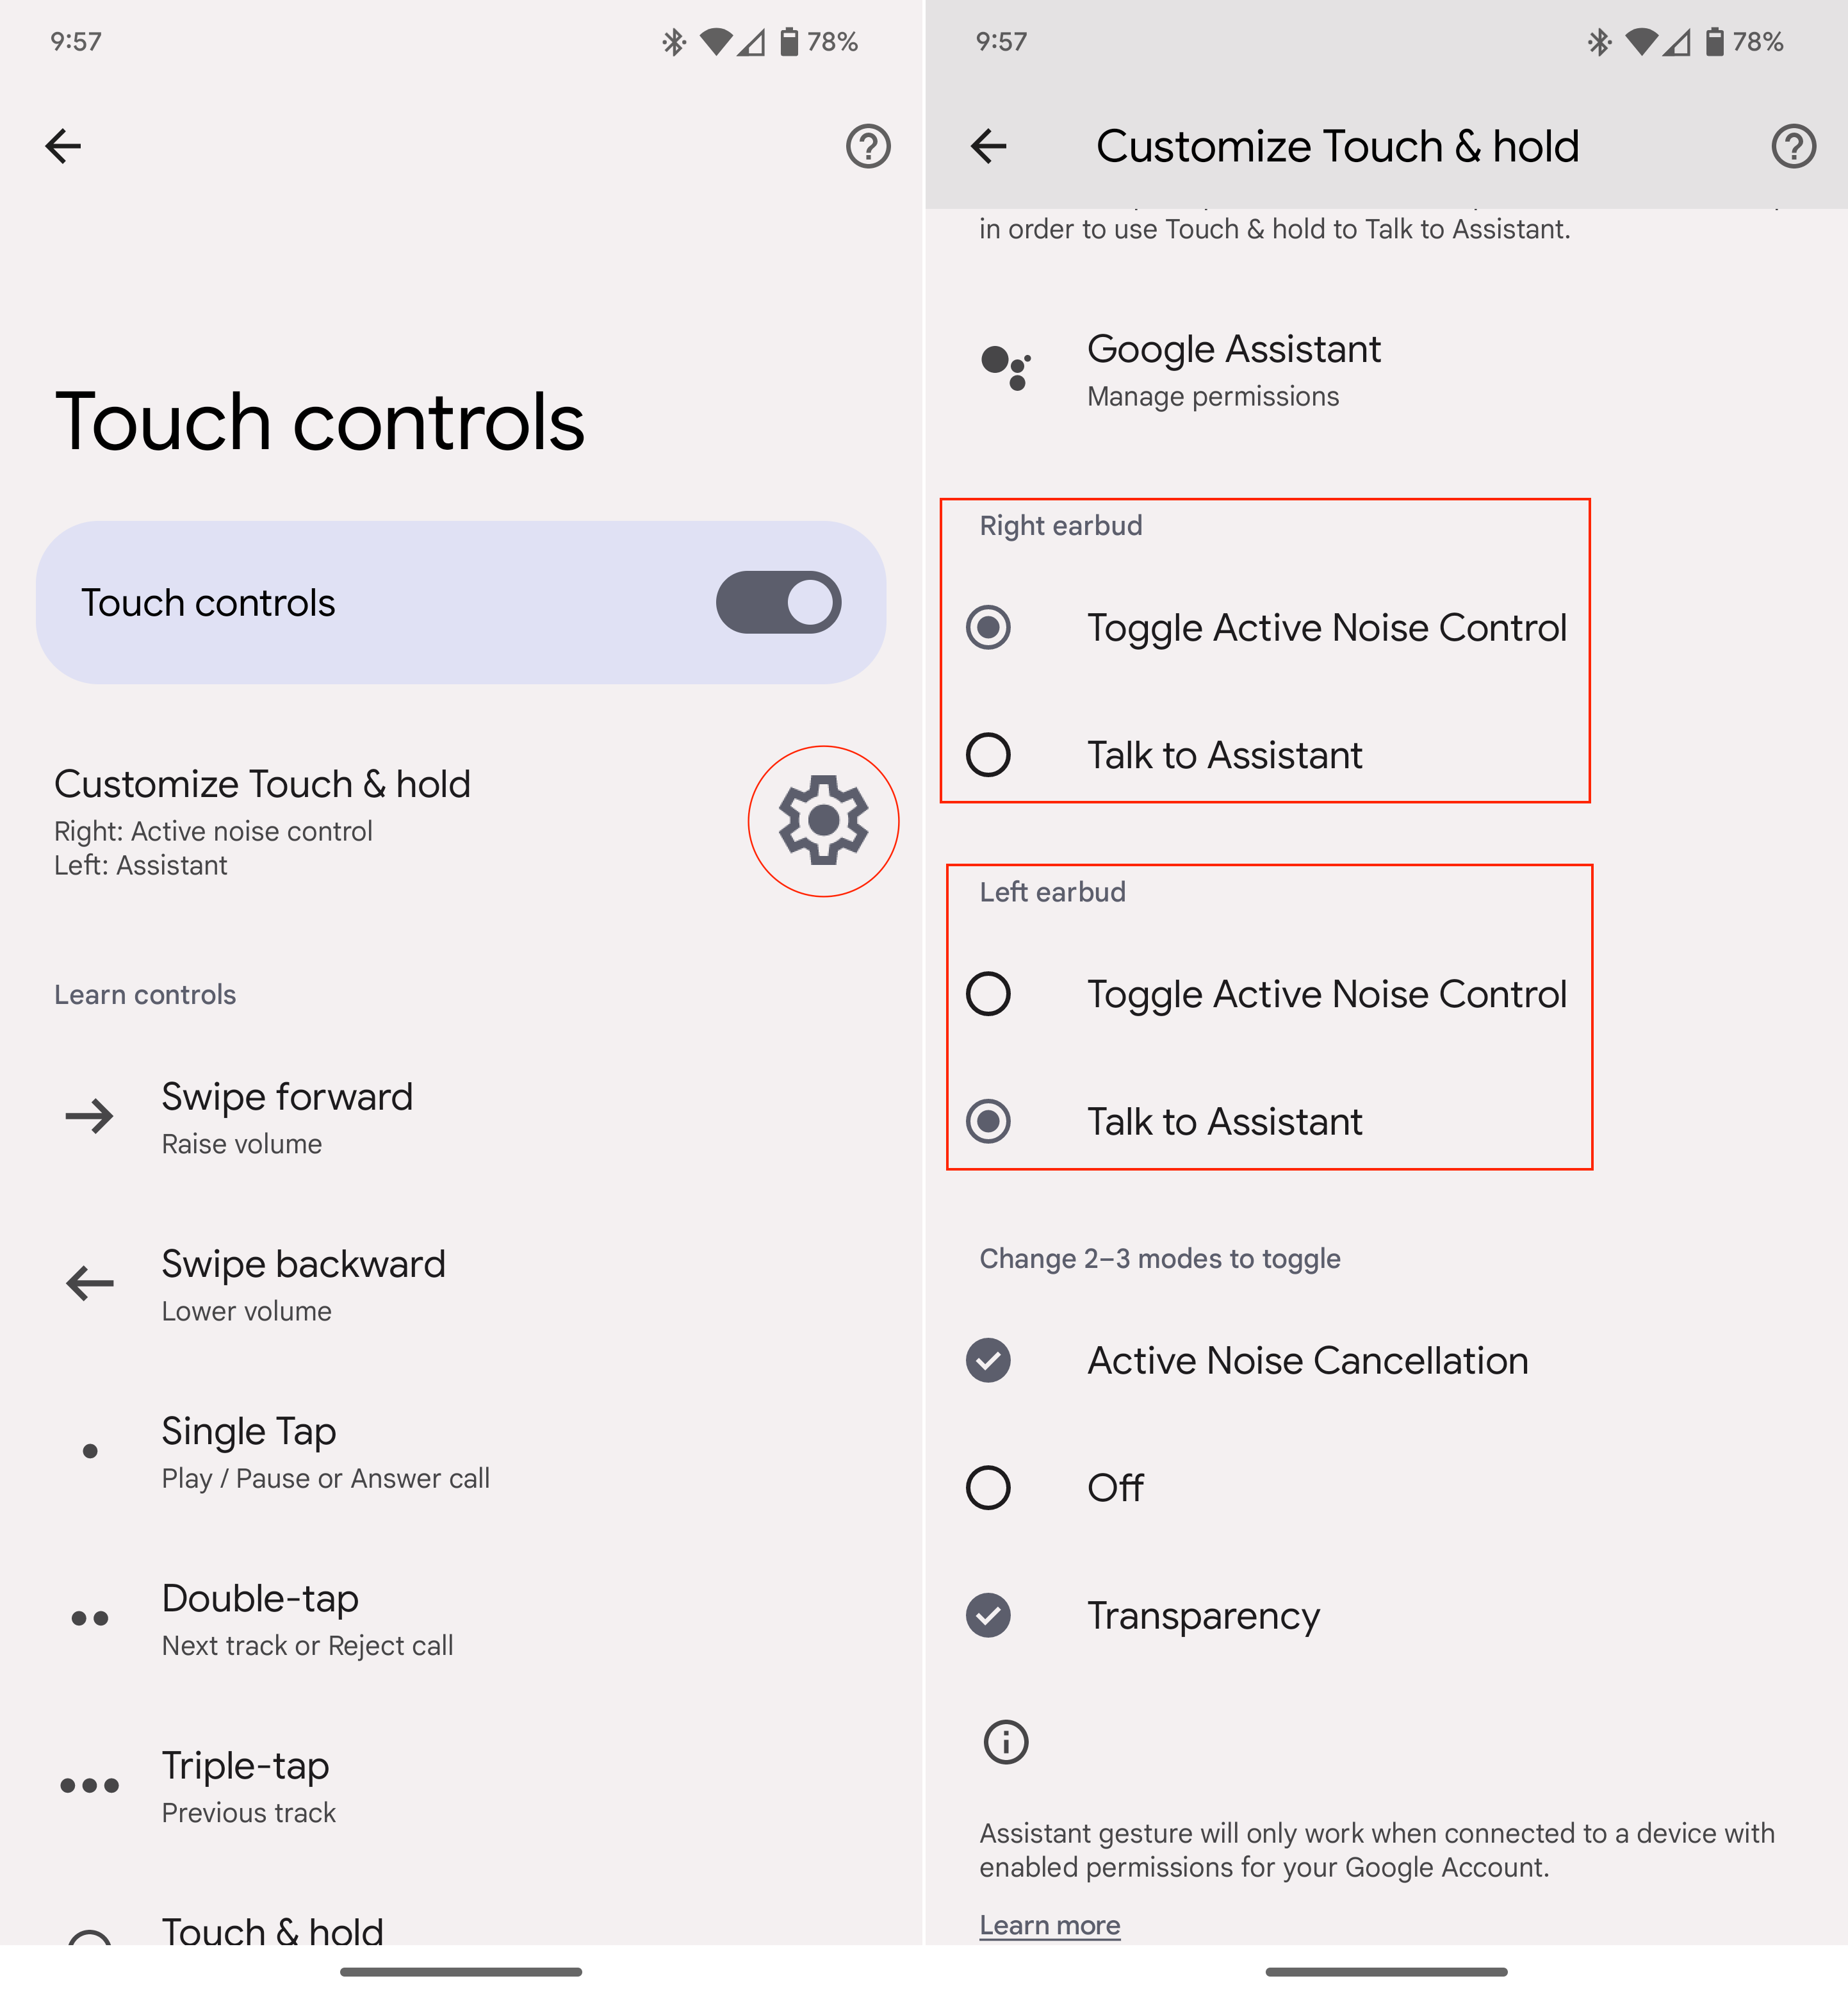 Customizing the touch control settings on the Pixel Buds Pro